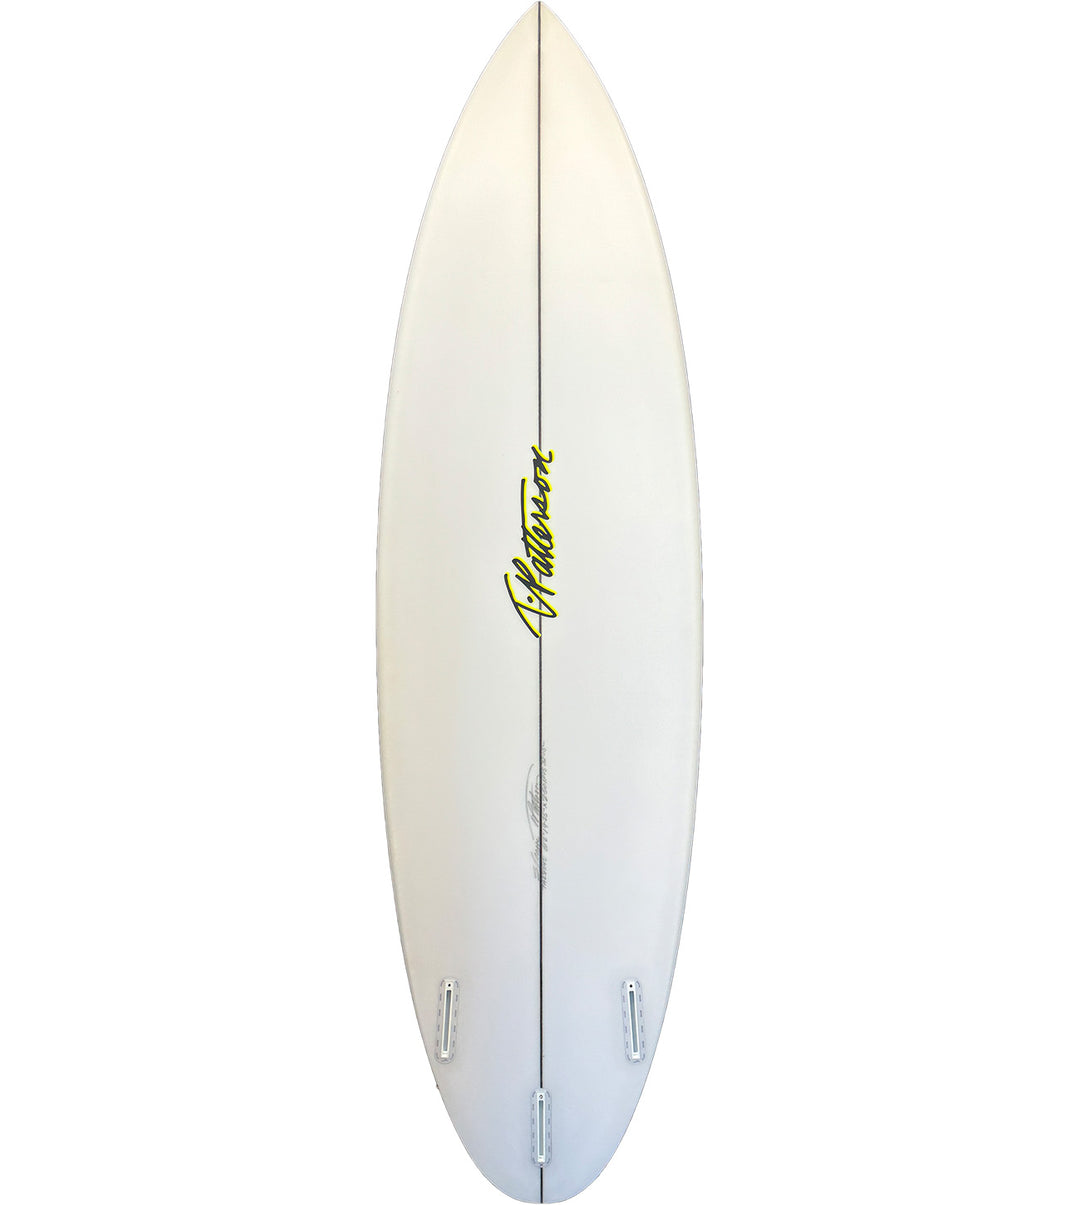 TPatterson Surfboard
IF15/Futures 6'2 #TPS231345